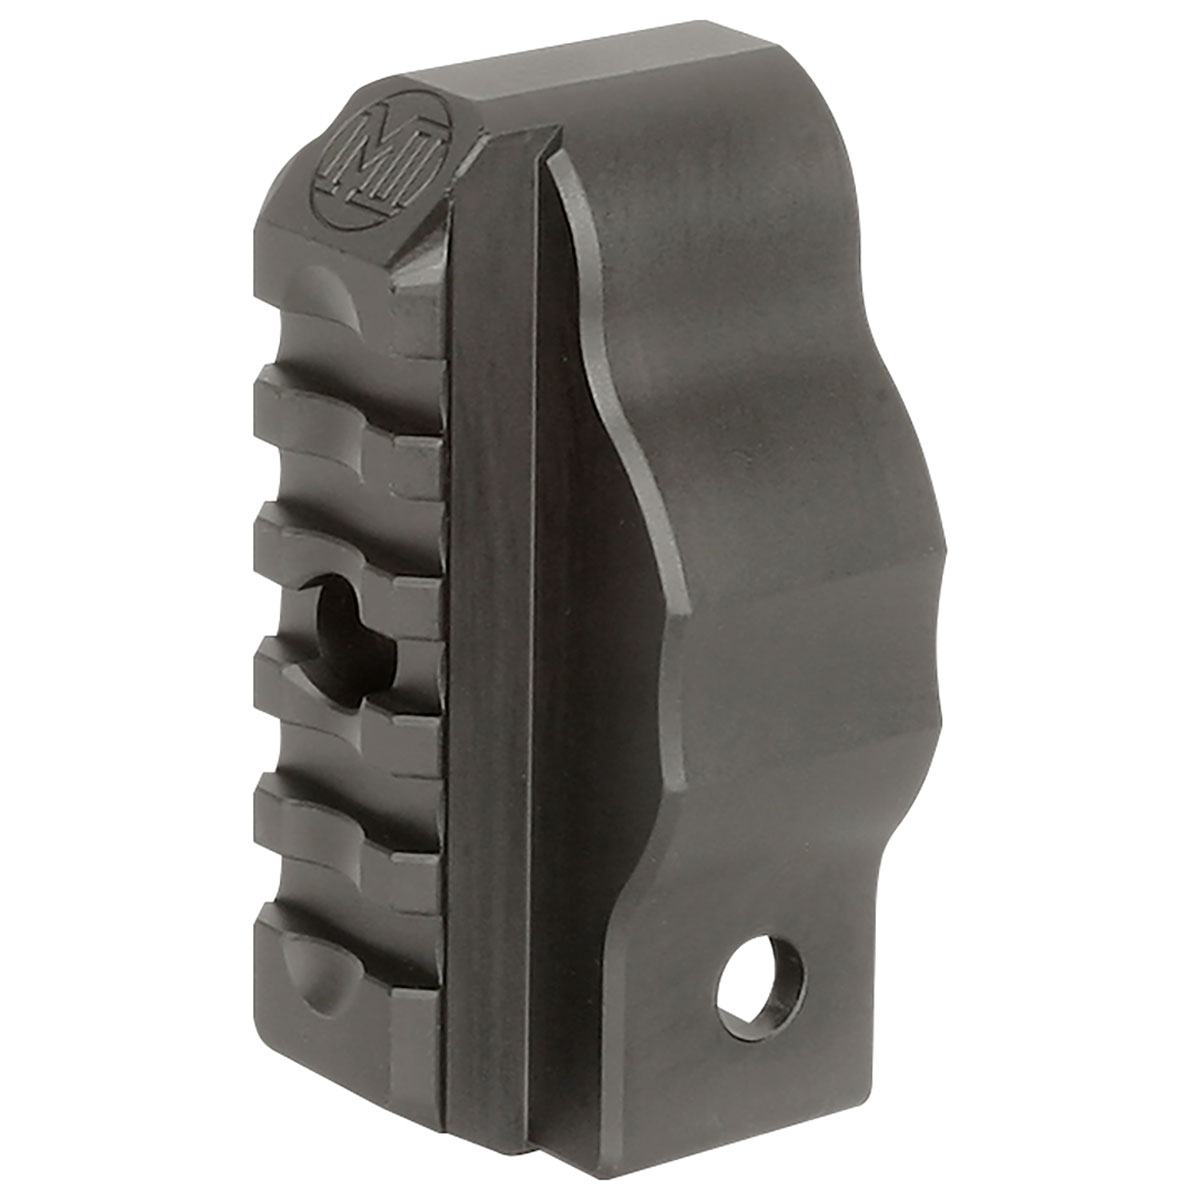 MIDWEST INDUSTRIES, INC. - MP5/MP5K 1913 END PLATE ADAPTOR